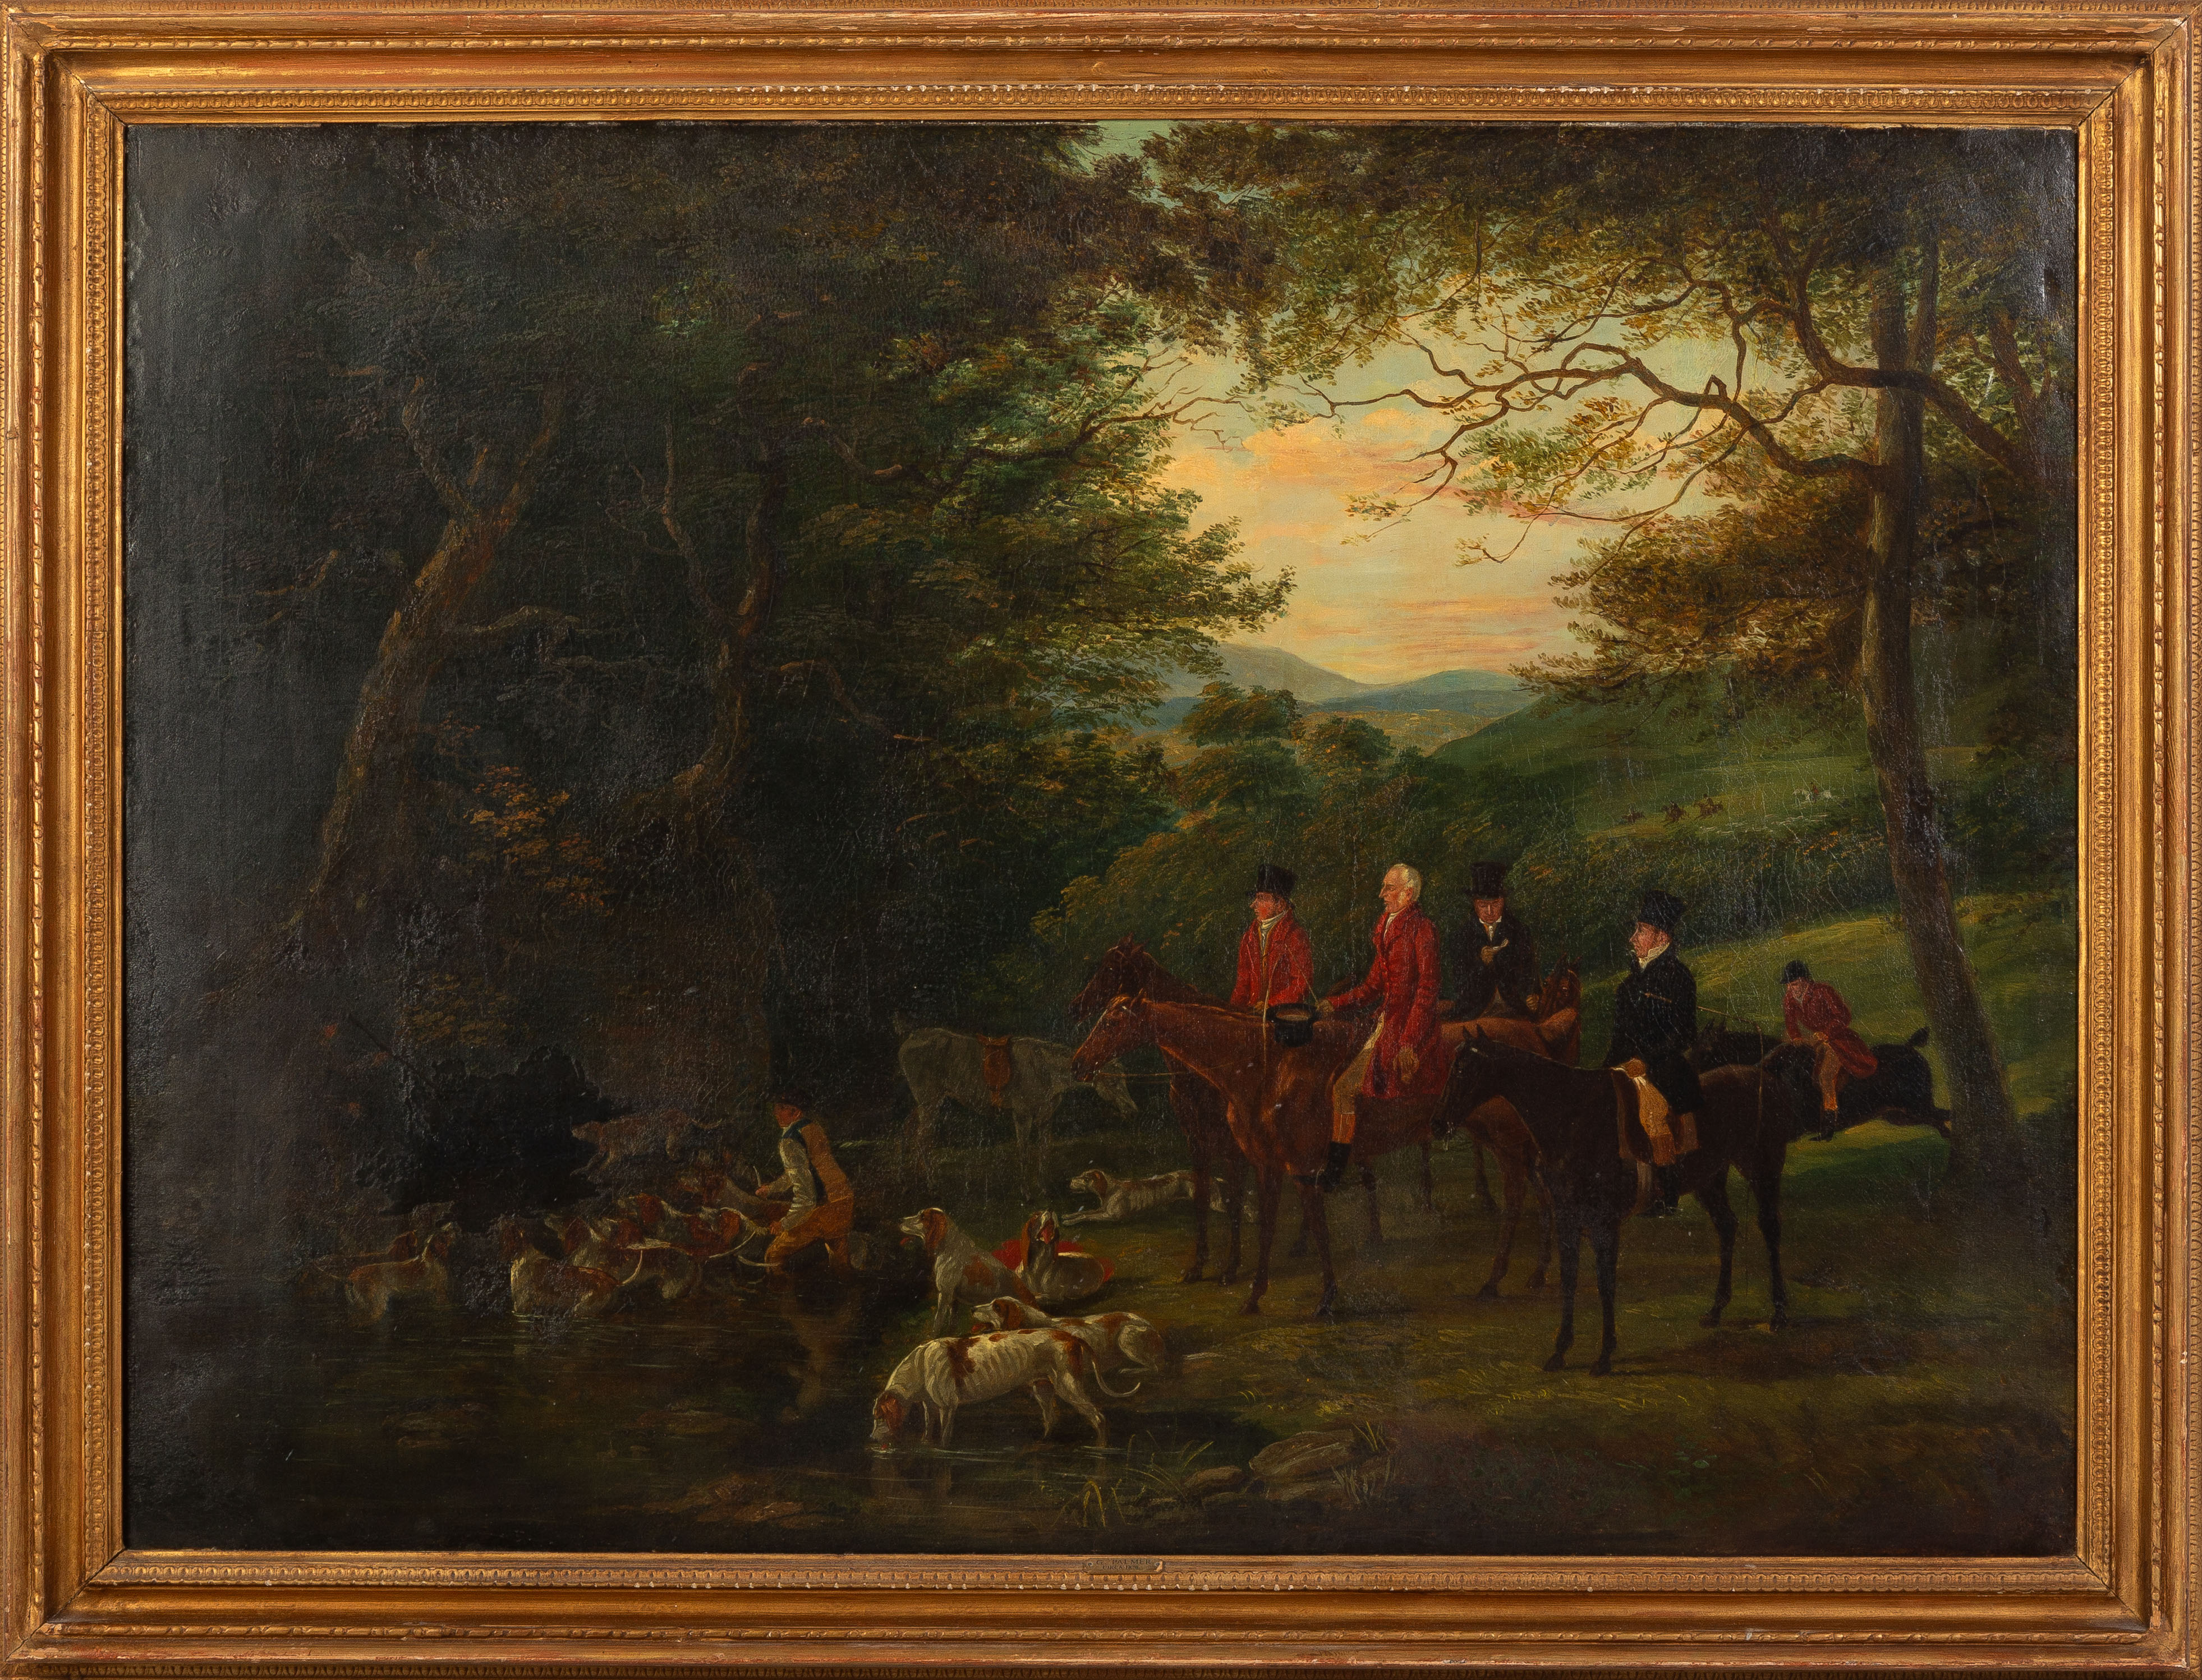 ATTRIBUTED TO GEORGE GIDLEY PALMER 3c82d2